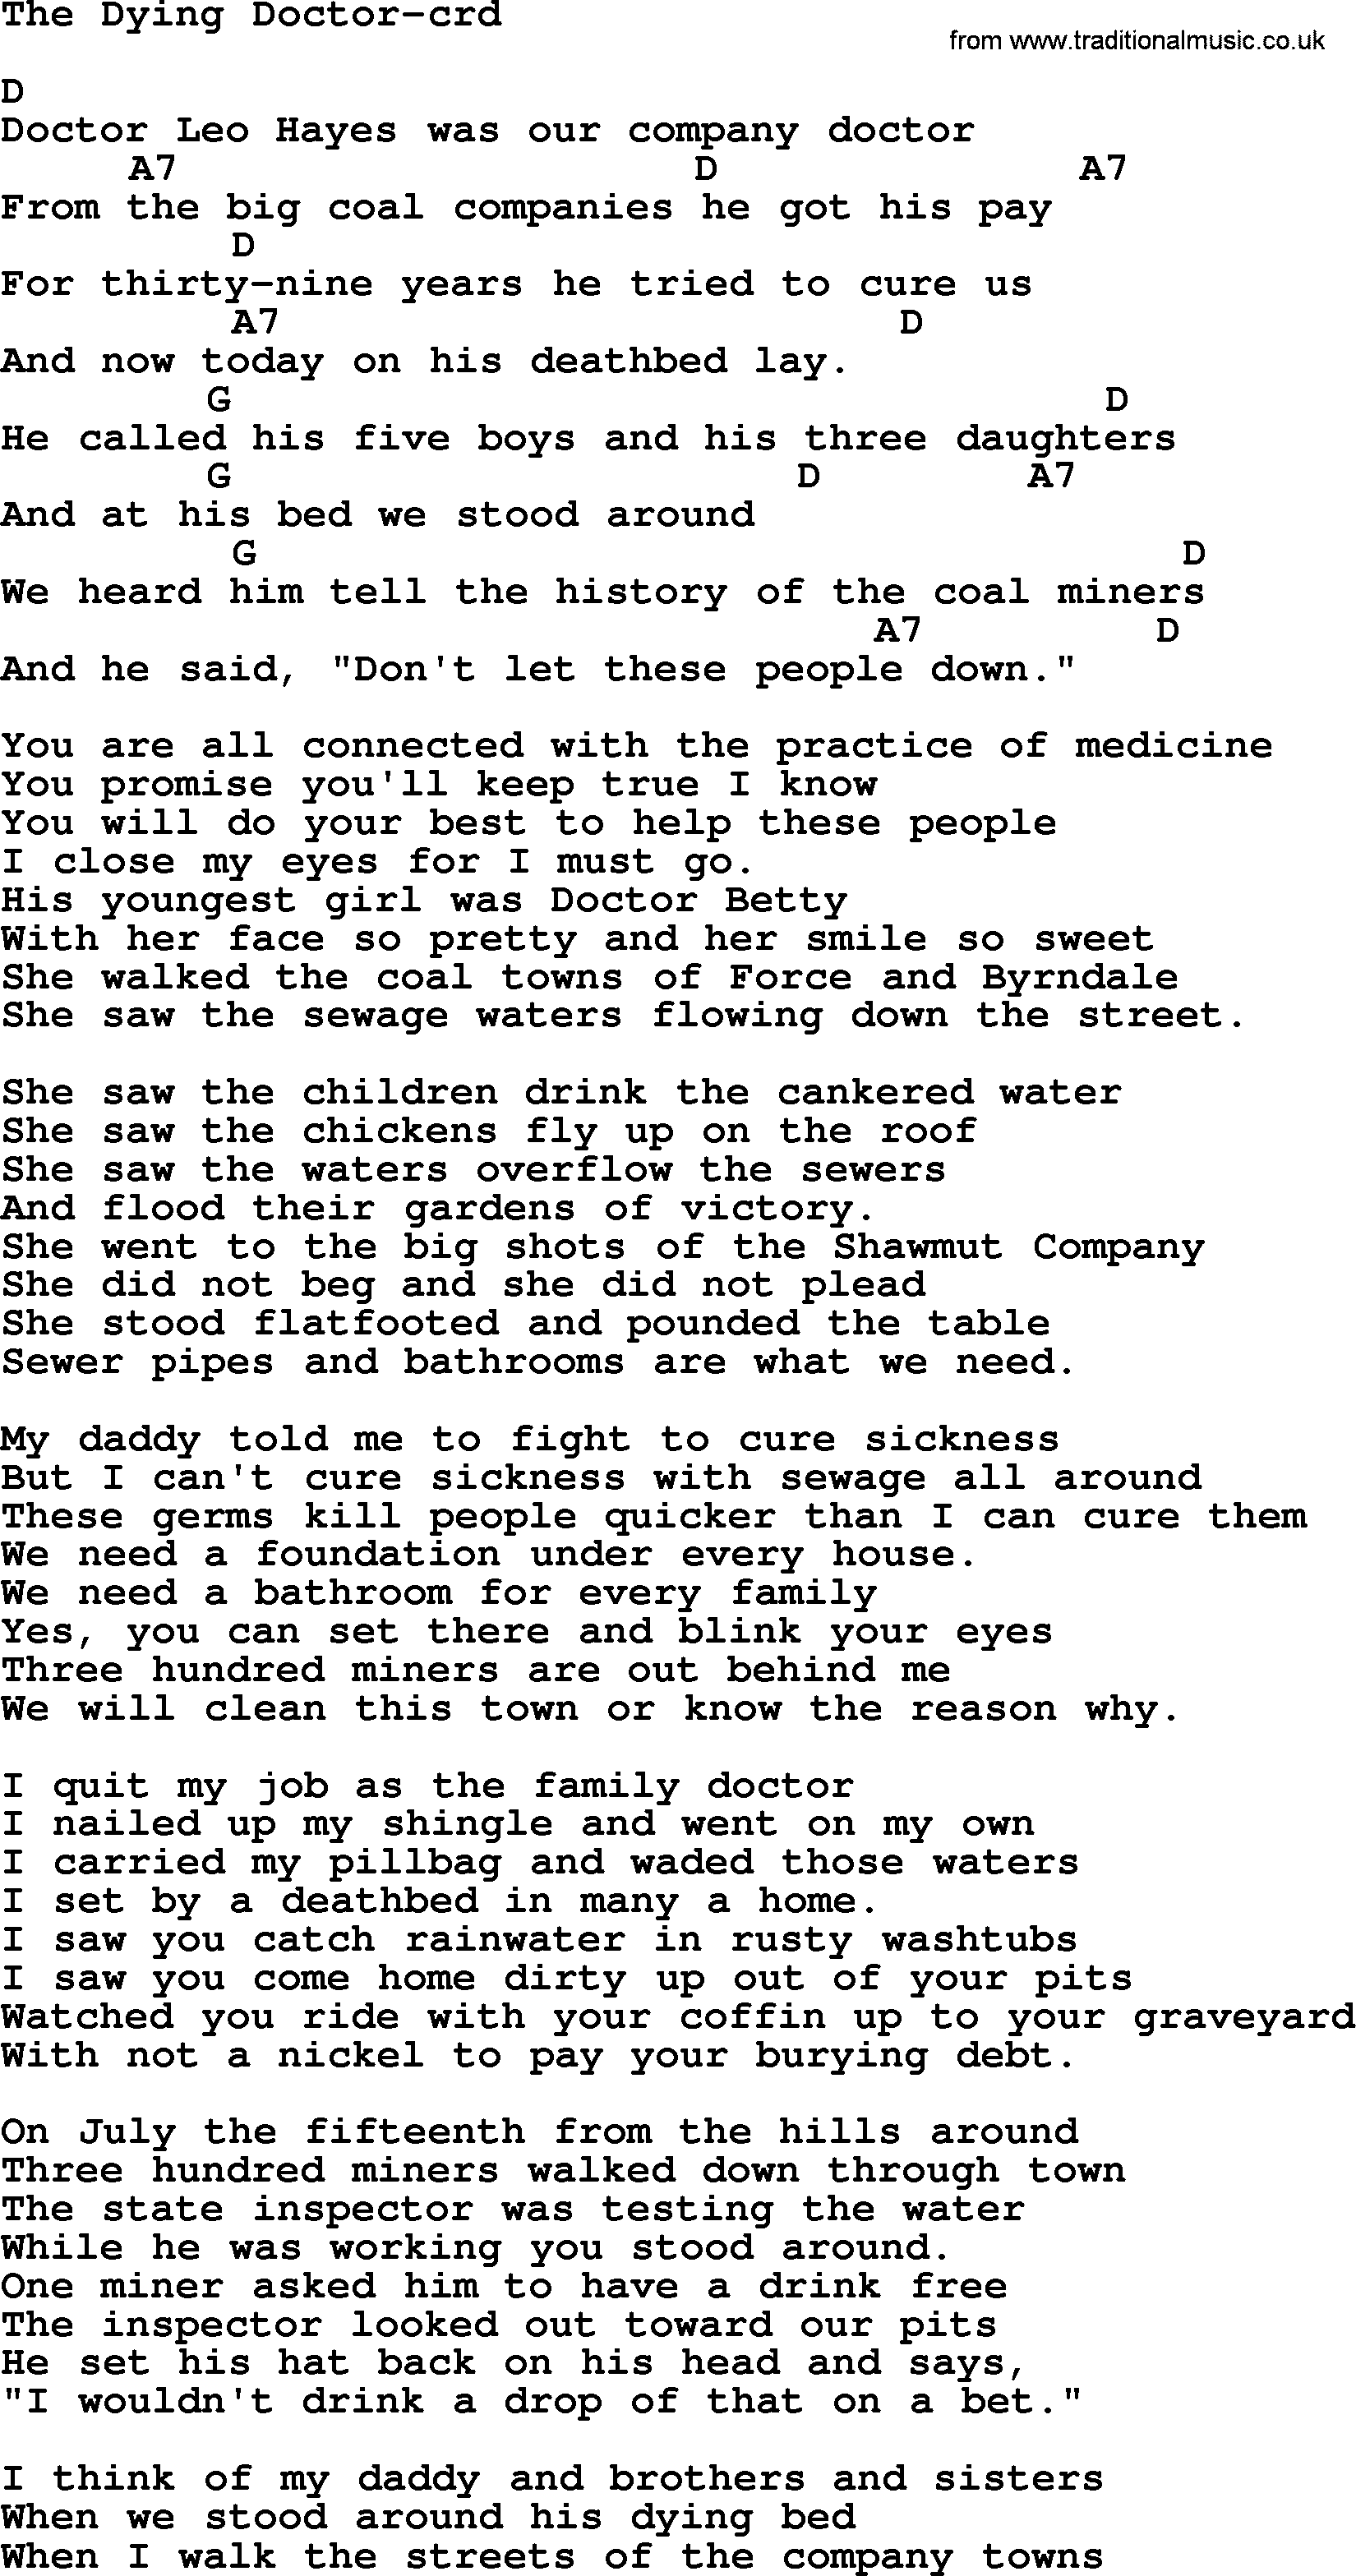 Woody Guthrie song The Dying Doctor lyrics and chords